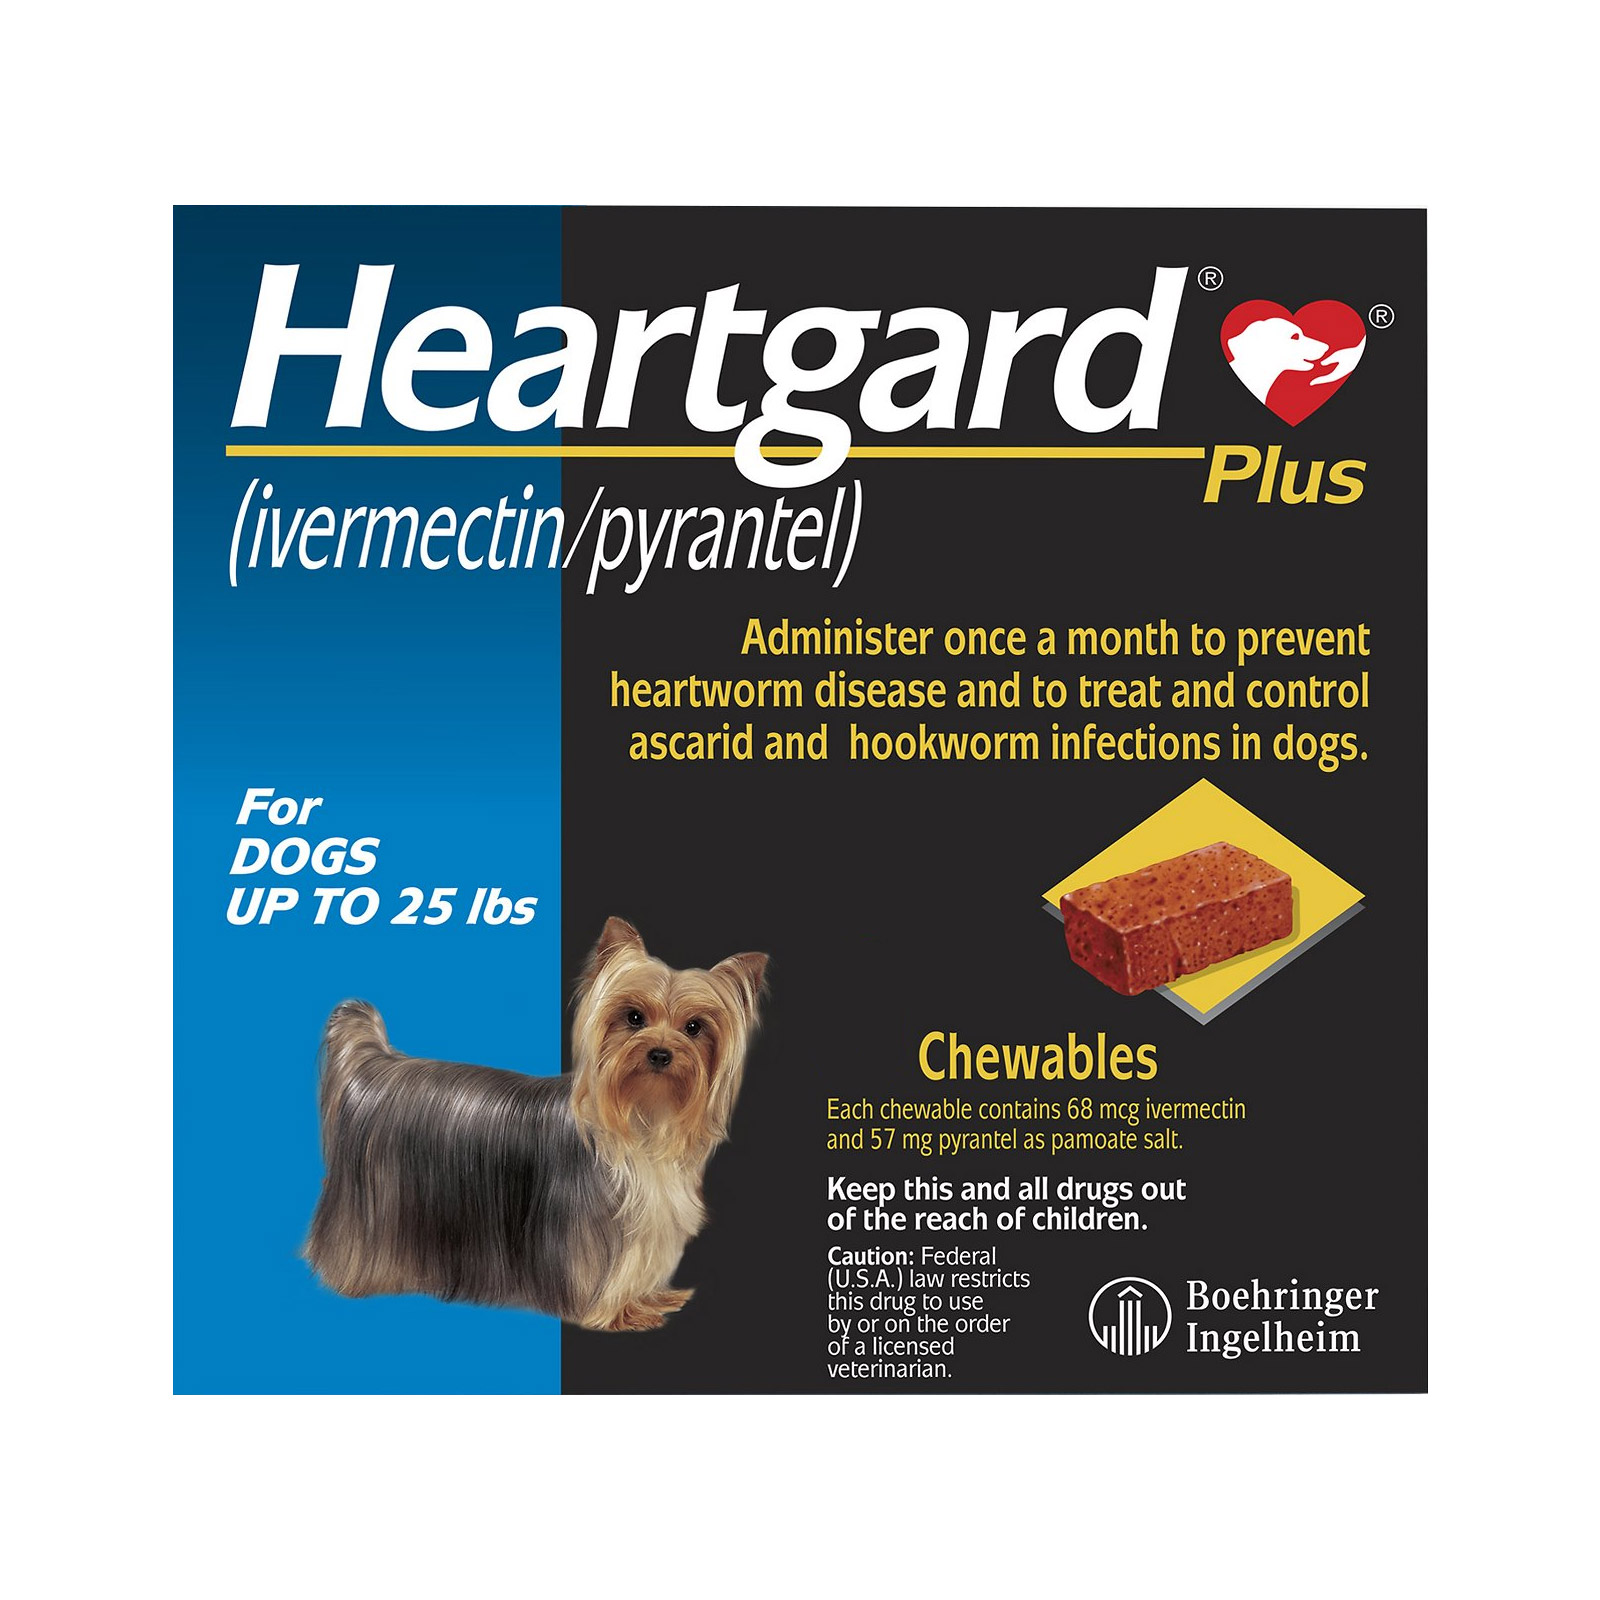 Buy Heartgard Plus for Dogs Online | Lowest Price Guarantee